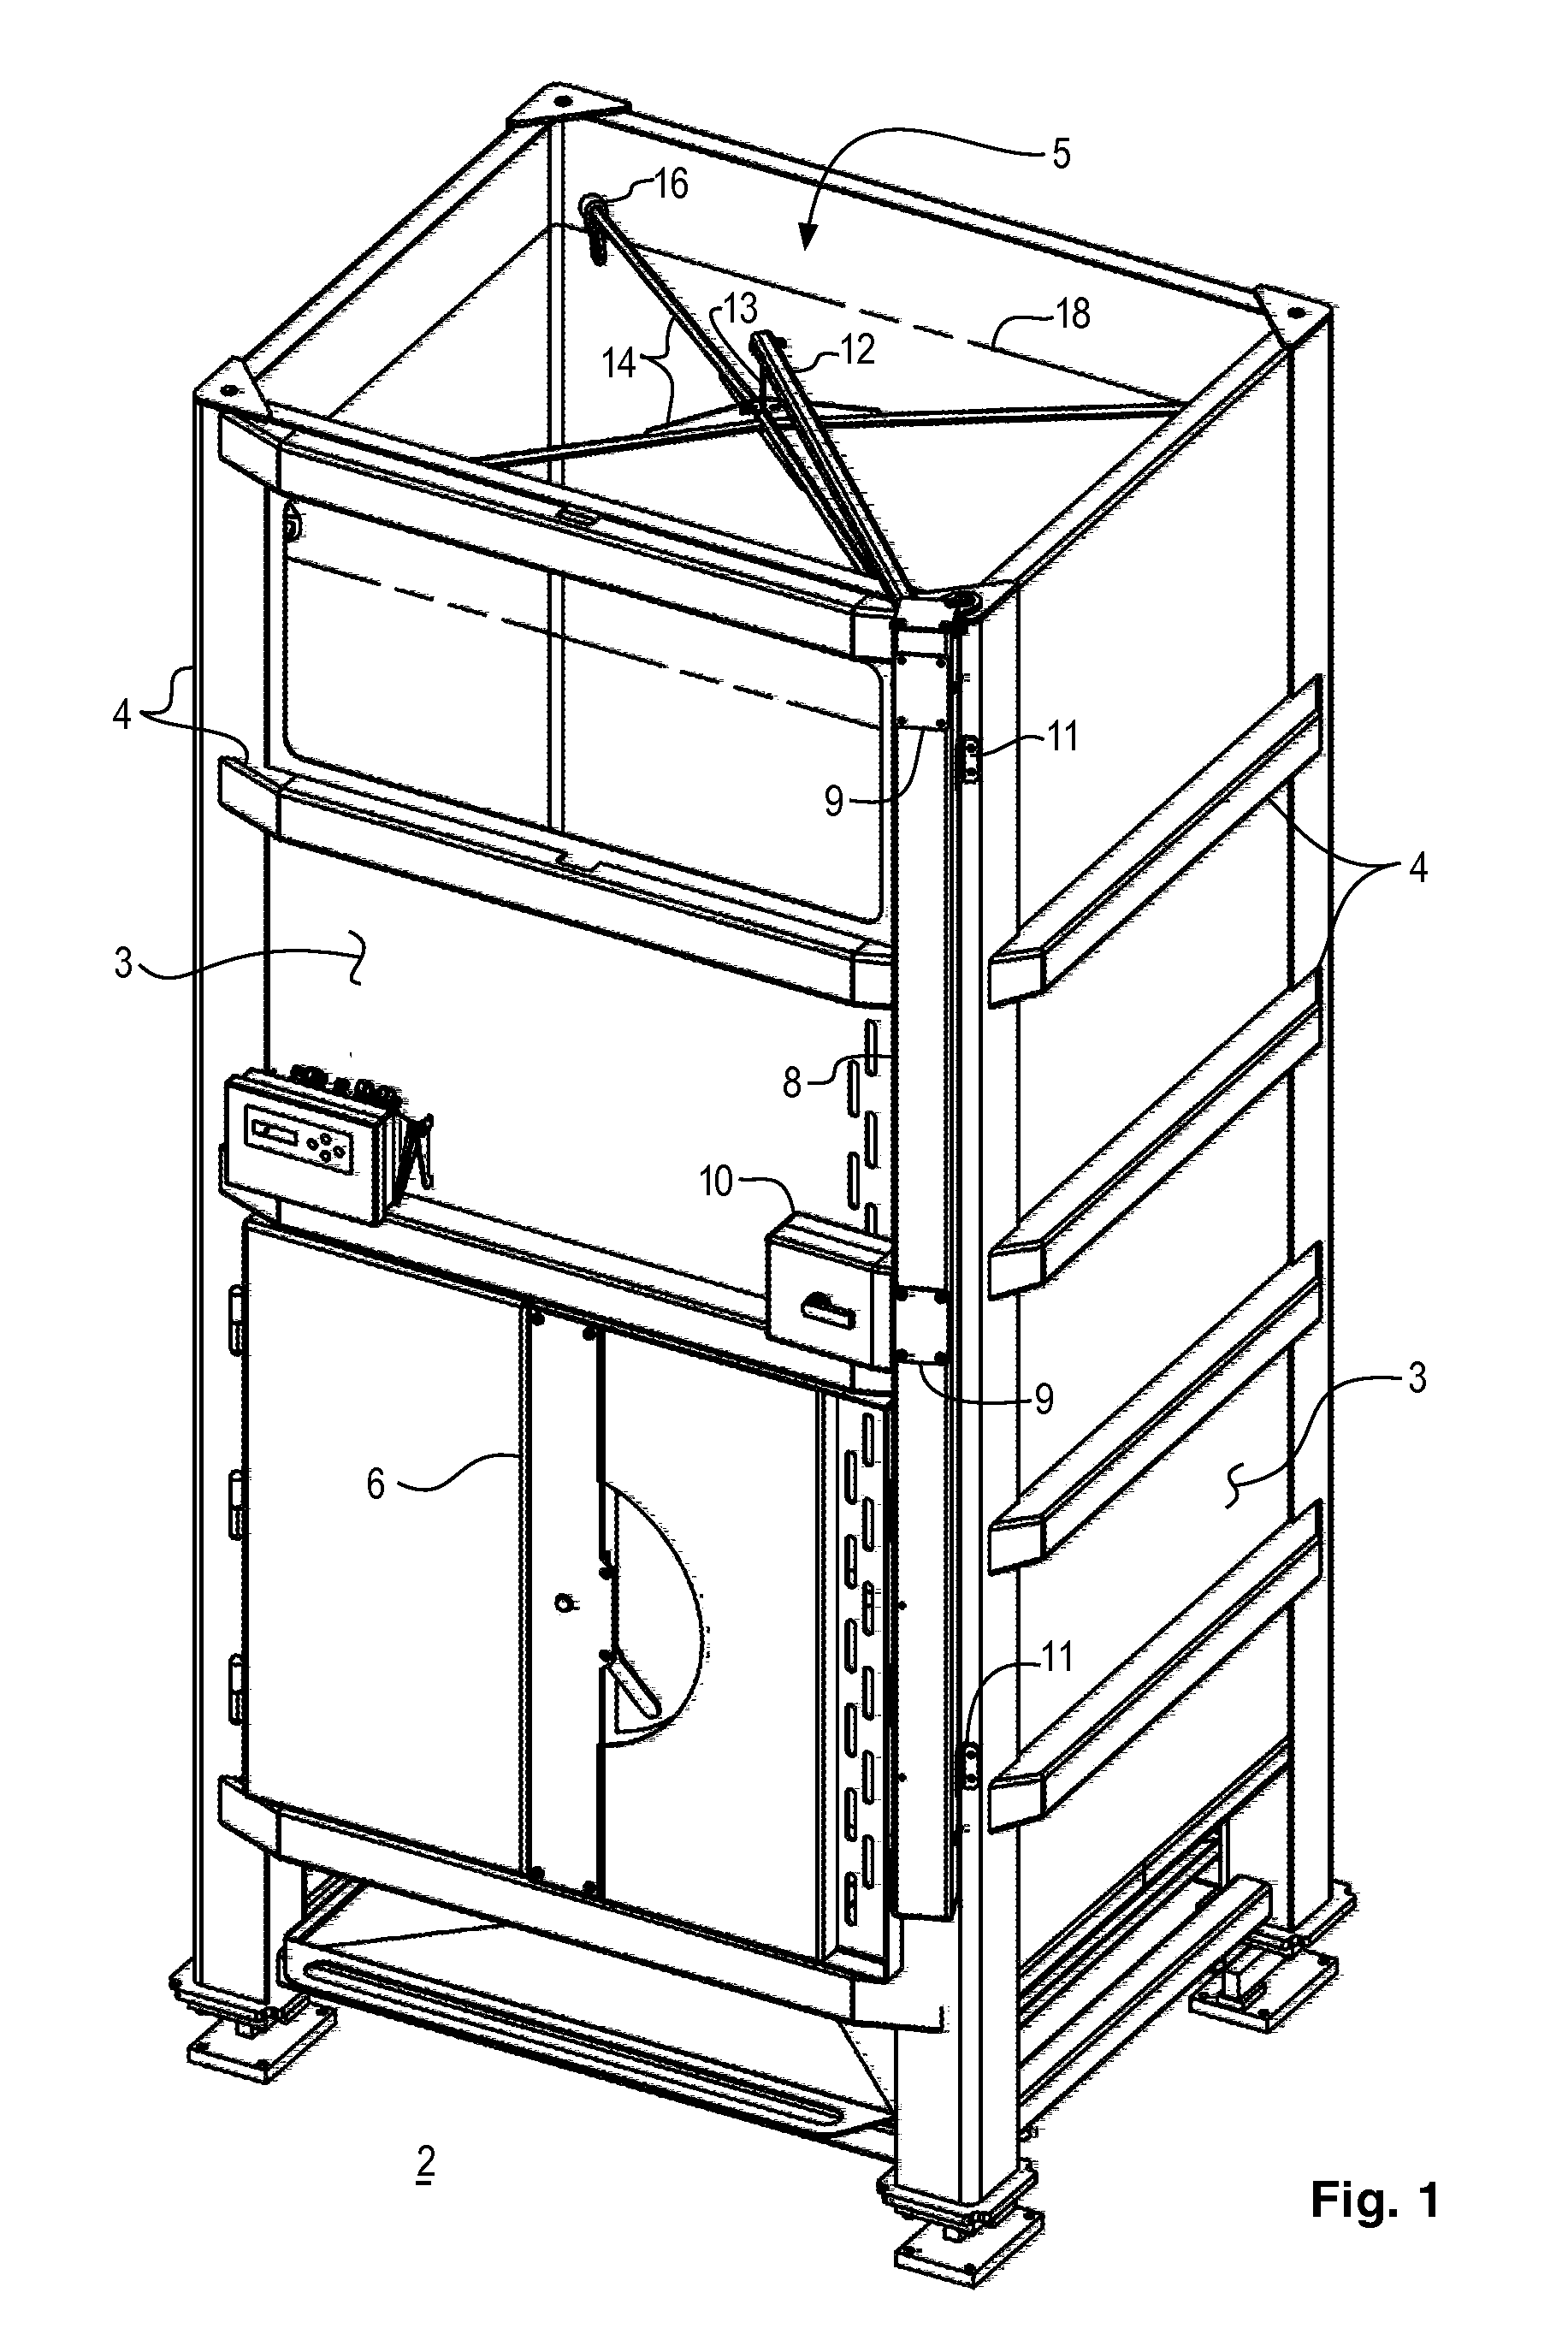 Bag Lift Assembly for a Lined Bulk Material Container